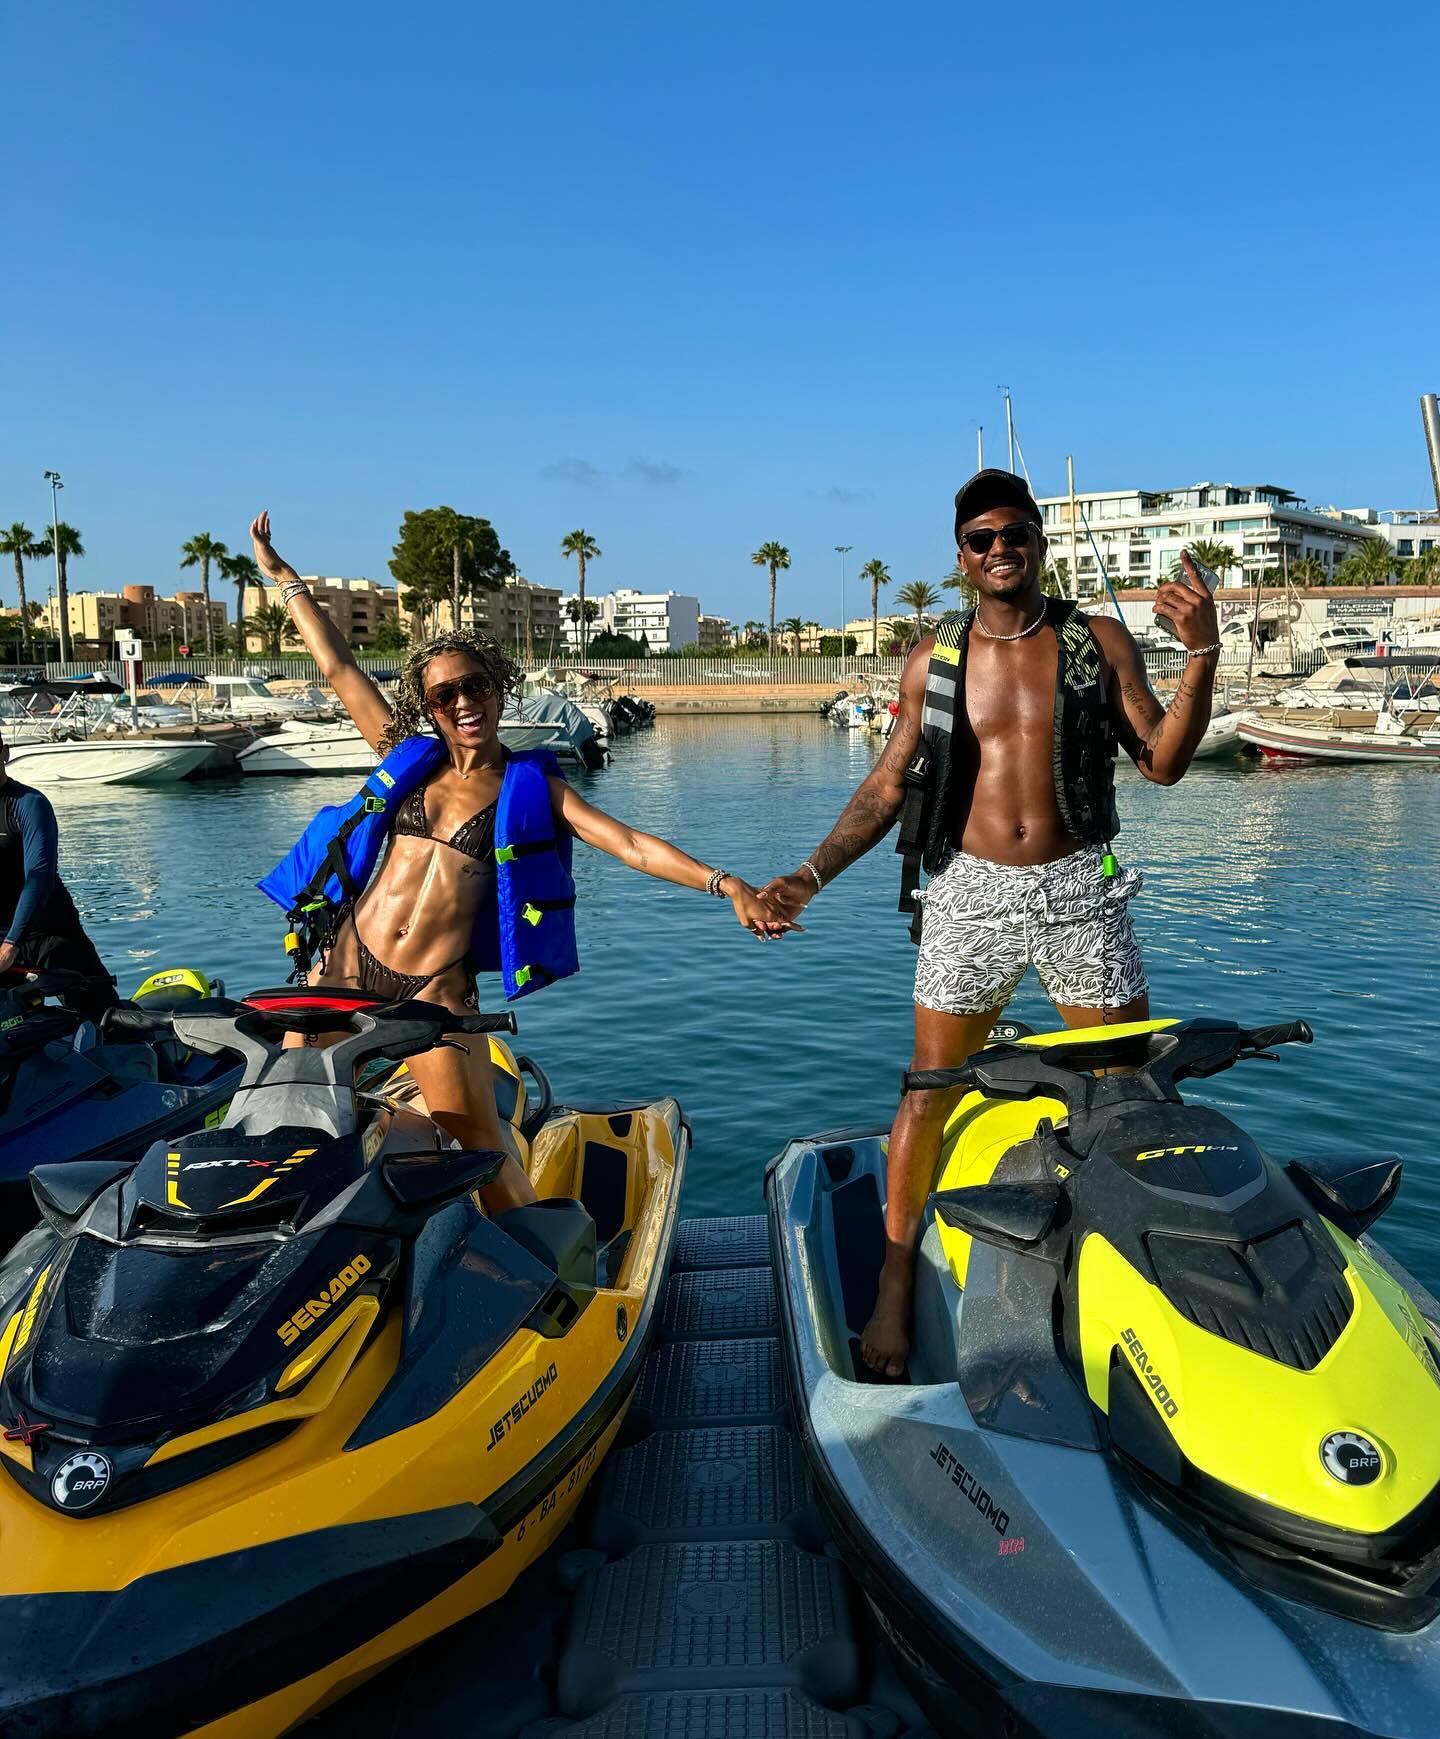 They also did some jet skiing in the Mediterranean Sea